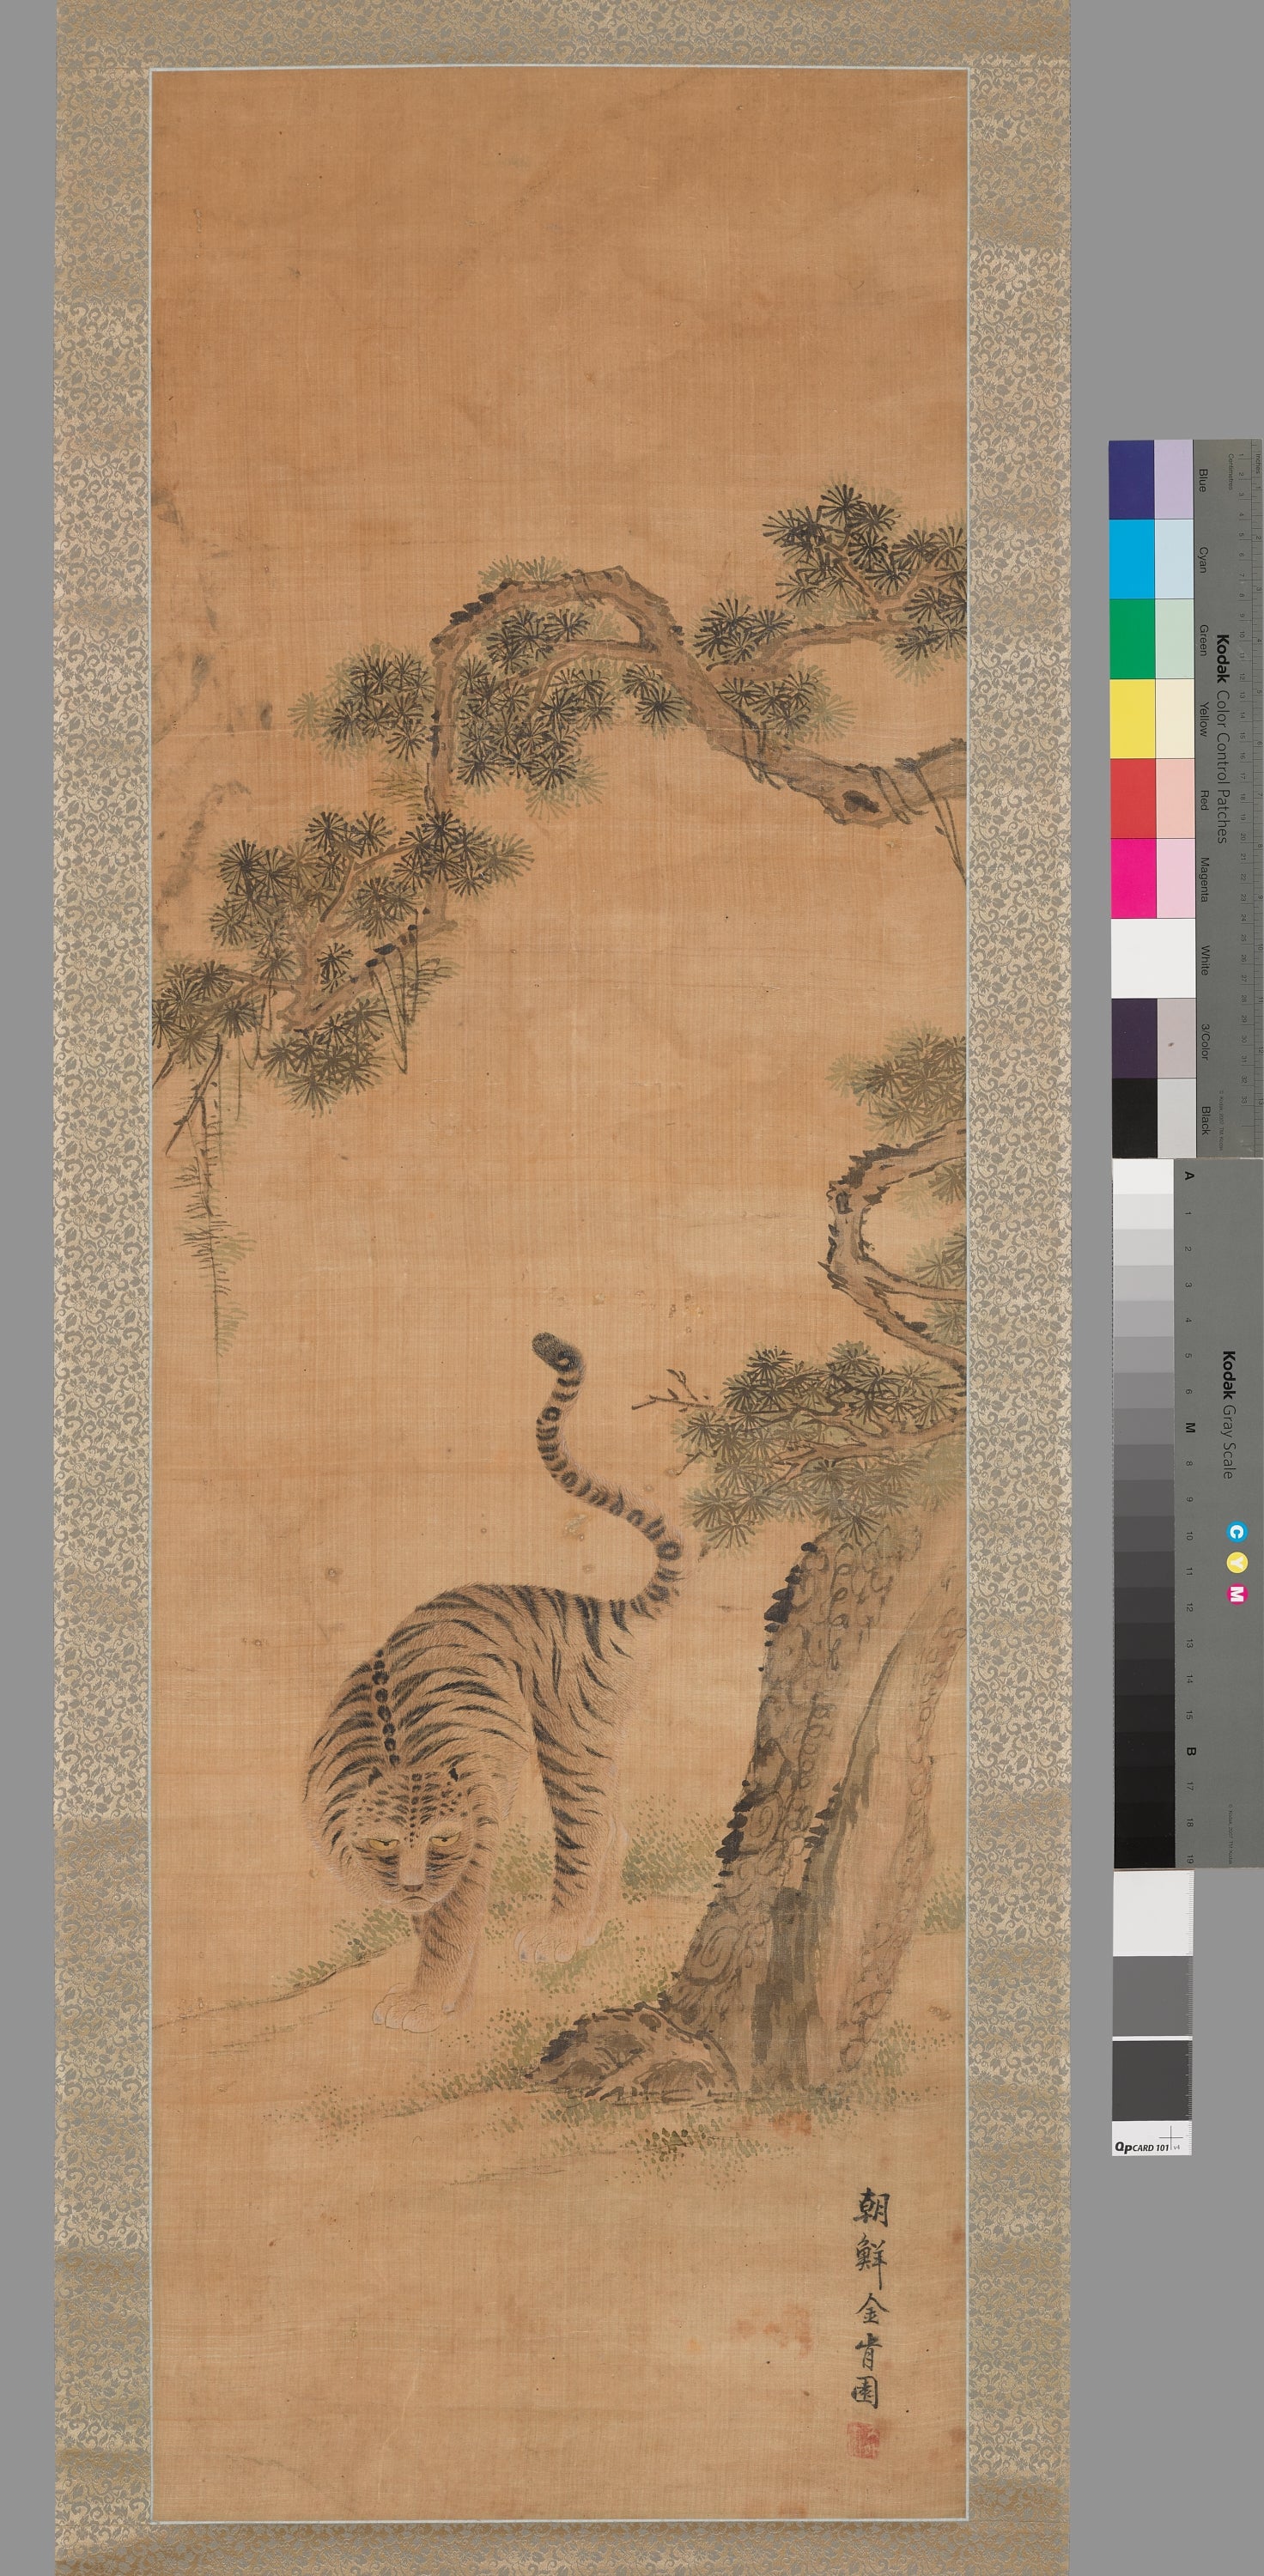 Painting of a Ferocious Tiger under a Pine Tree